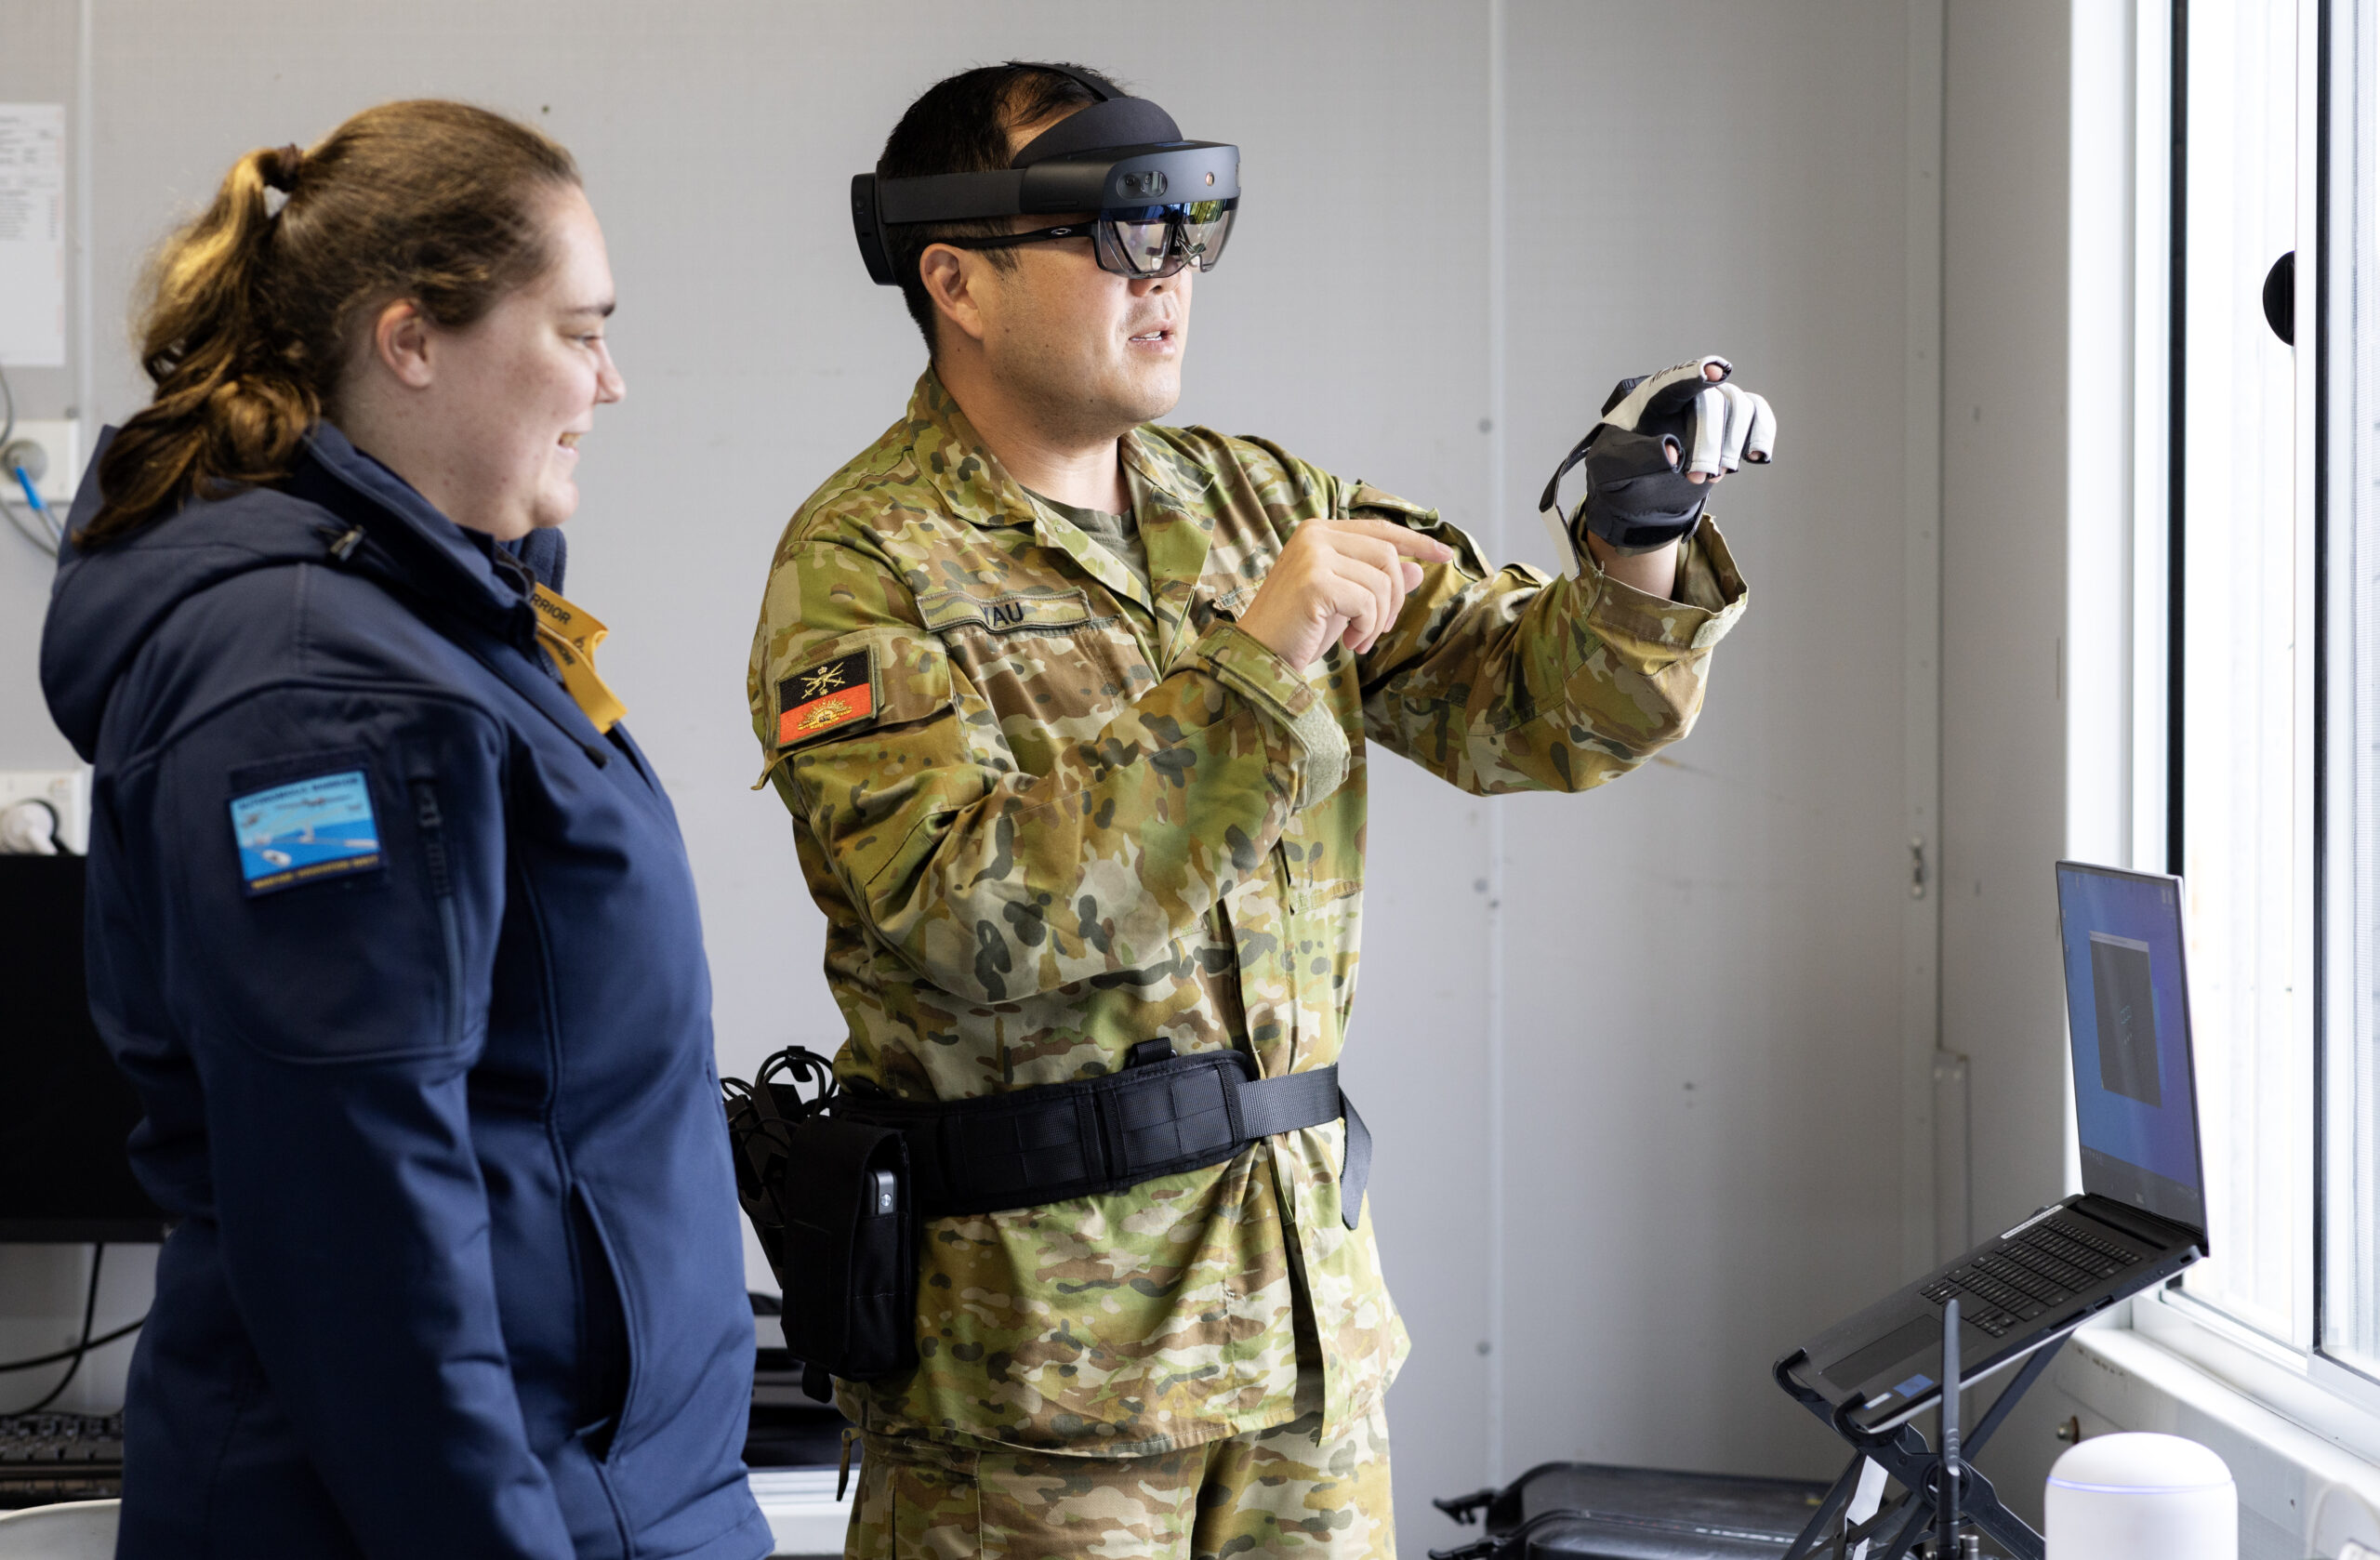 Caitlyn Sims and Major Ivan Yau demonstrate Multimodal Edge 4 (MEC4) during the Technical Cooperation Program AI Strategic Challenge 2023 at HMAS Creswell, Jervis Bay Territory. *** Local Caption *** The Technical Cooperation Program (TTCP) AI Strategic Challenge (AISC) 2023 will be held at HMAS Creswell, 09-27 October 2023.Bringing together Five Eyes (FVEY) nations personnel, AISC 2023 will have a program of live experiments and demonstrations across a variety of systems, situated in a scenario representative of a full military operation. AISC 2023 is seeking to accelerate the transition of Artificial Intelligence (AI) solutions into the hands of coalition armed forces.